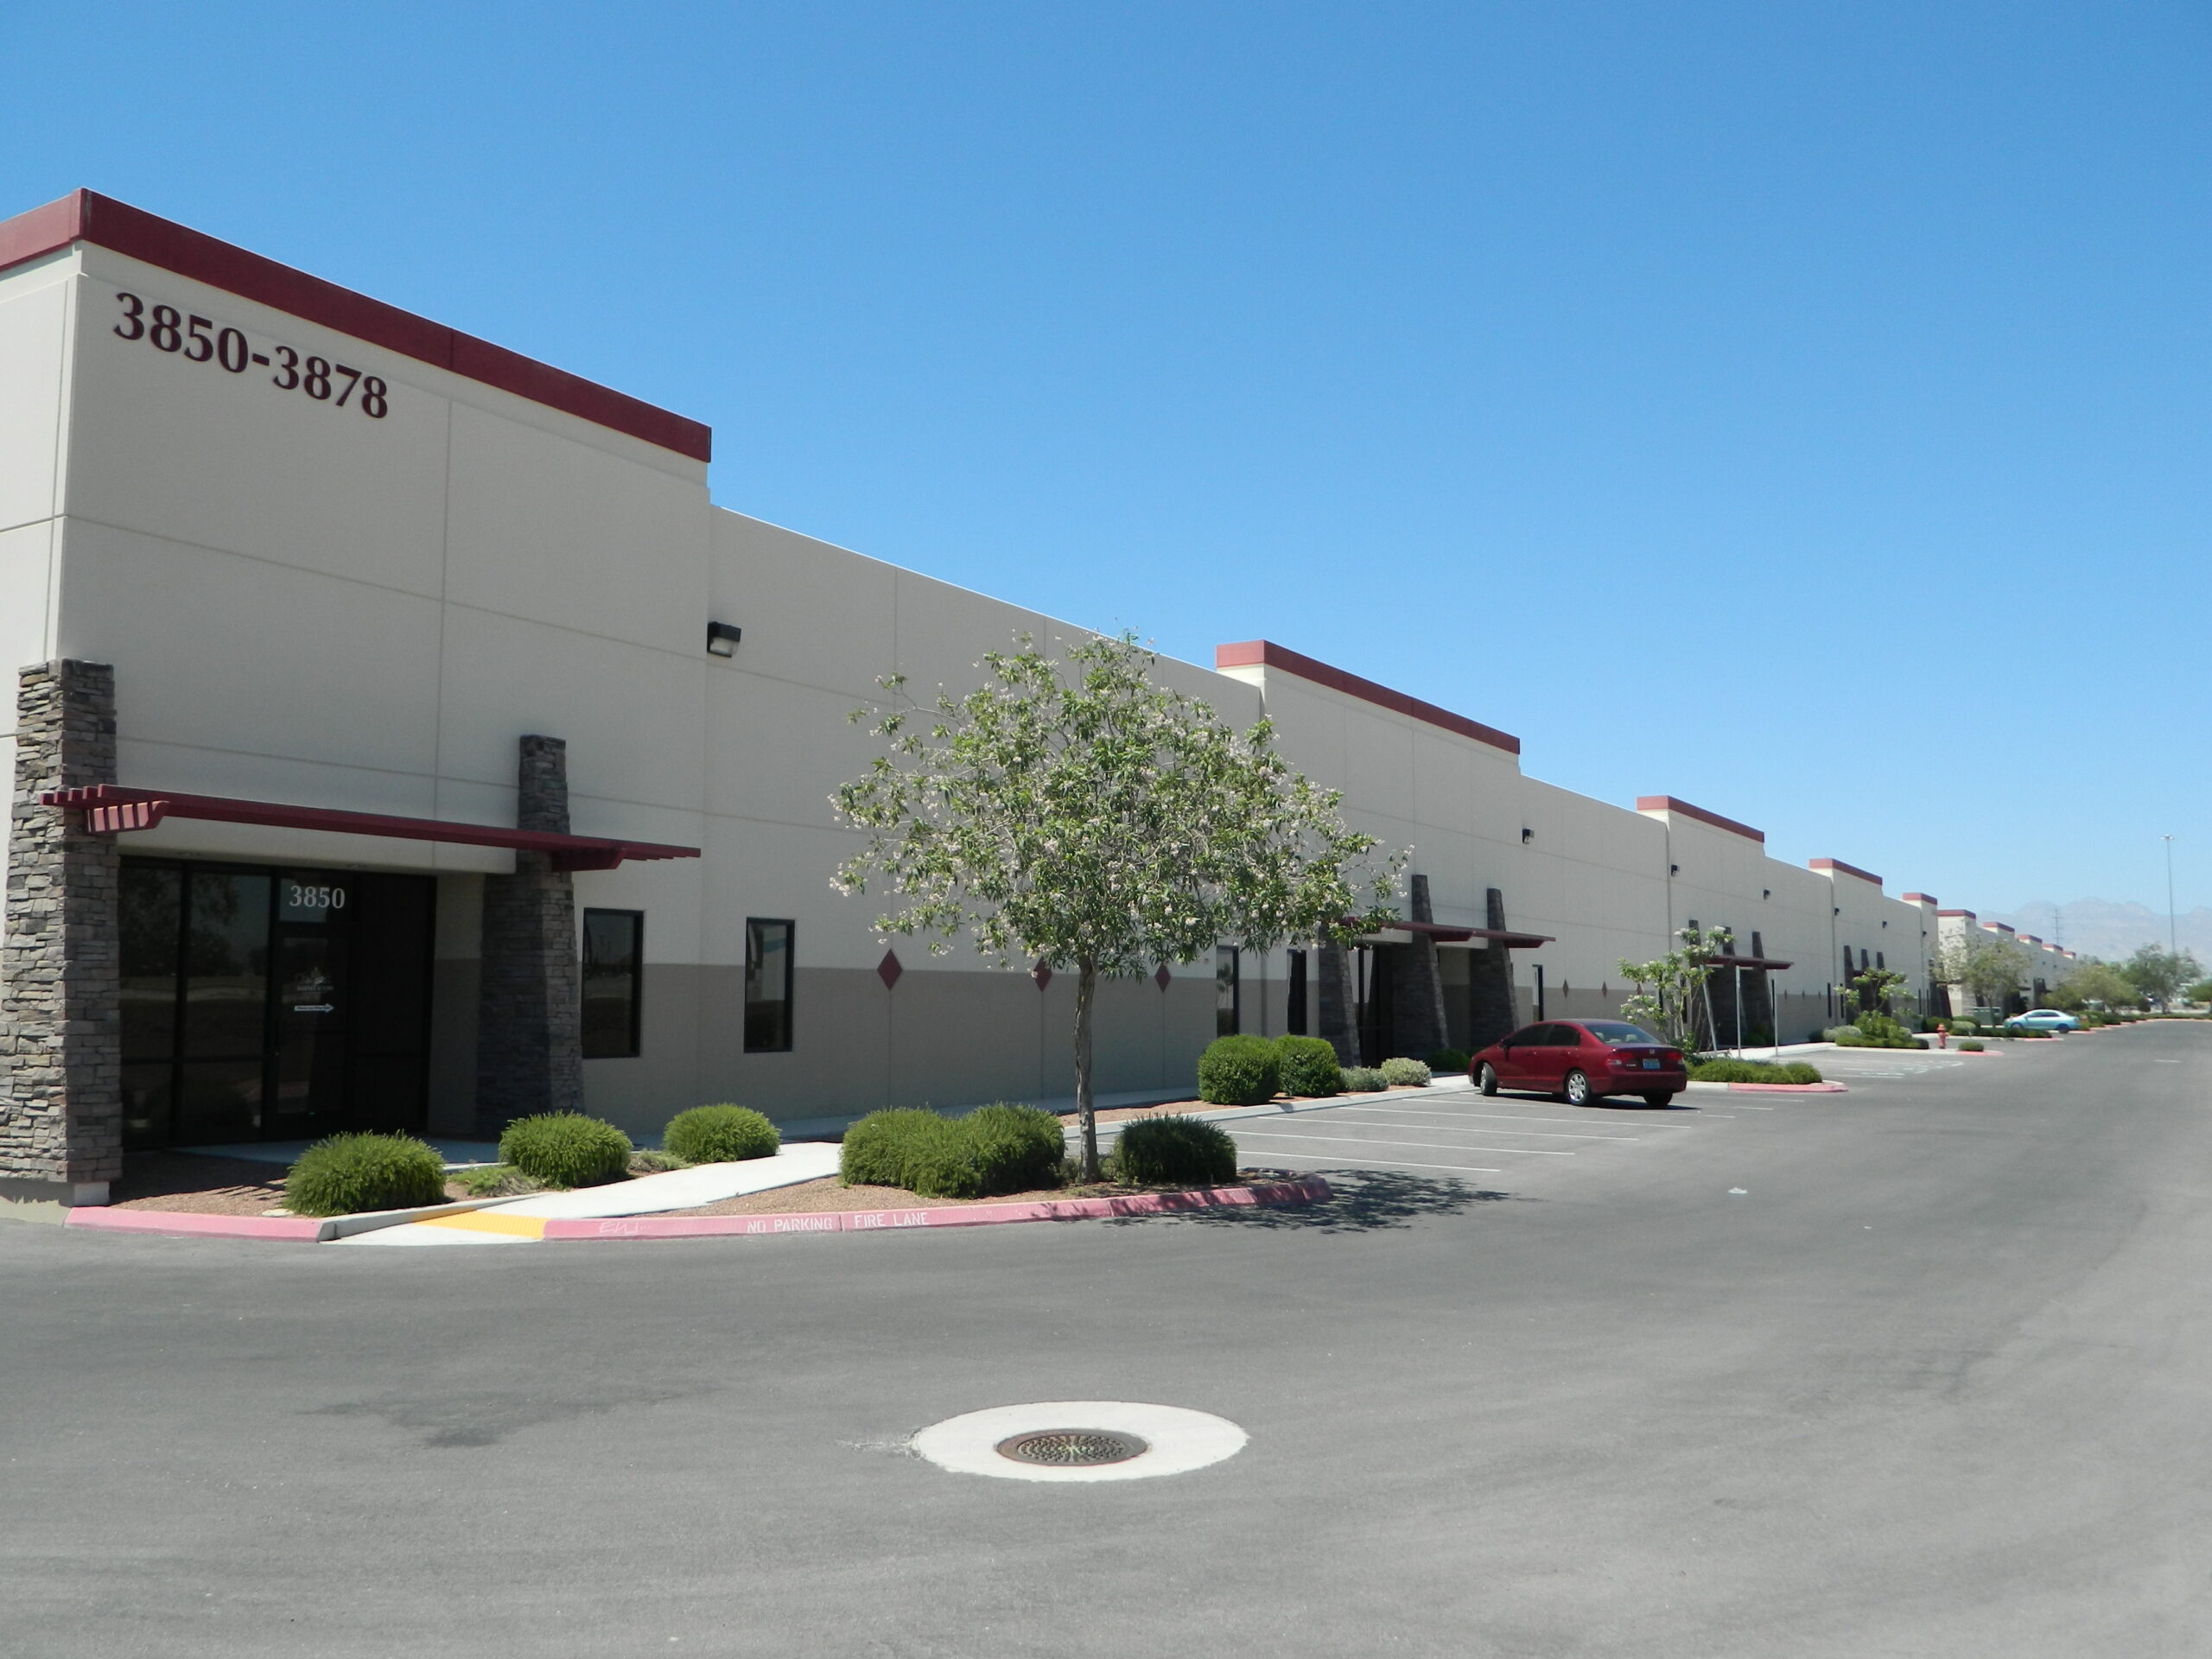 Colliers International – Las Vegas announced the finalization of a lease of a 4,008-square-foot industrial property in North Las Vegas.